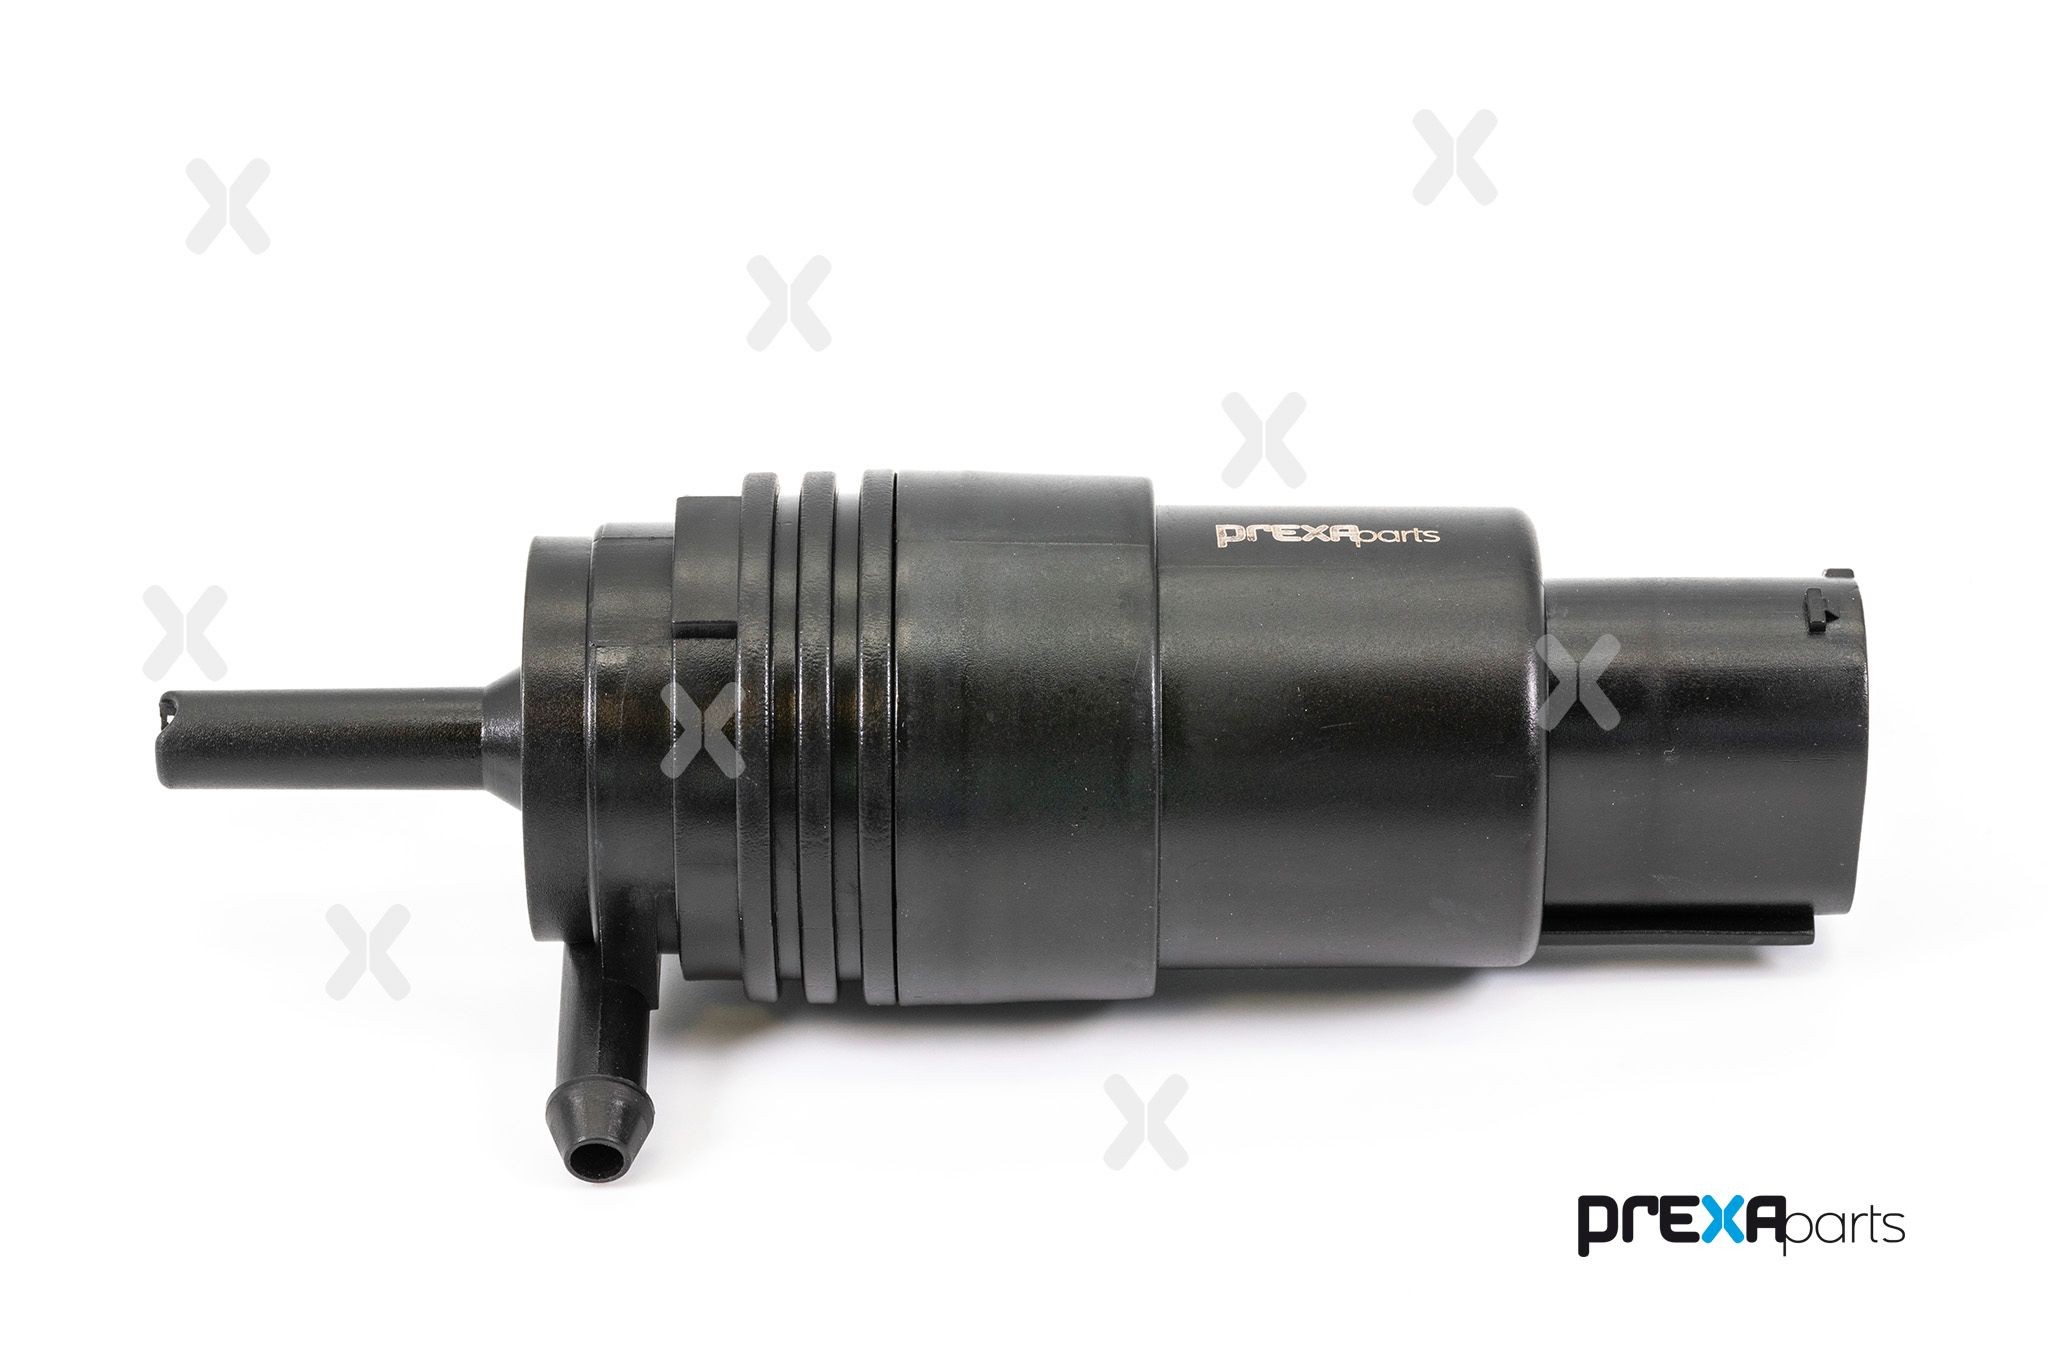 PREXAparts P208006 Water Pump, window cleaning 0001753V001